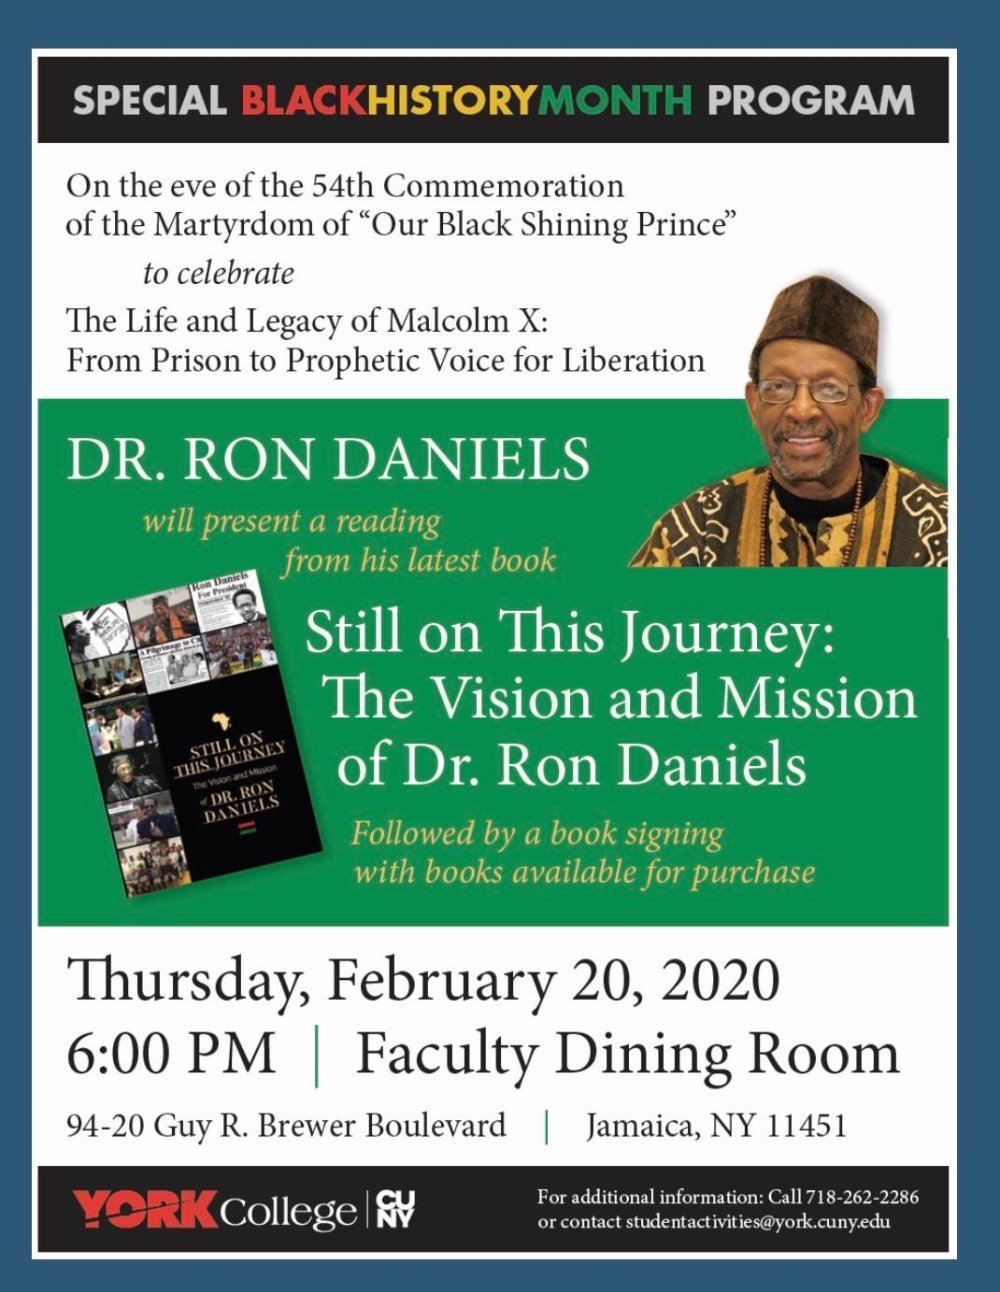 Dr. Ron Daniels stops by York College for a book signing and conversation about Reparations, Gentrification, Pan-Africanism and and 2020 The Year of Marcus Garvey.